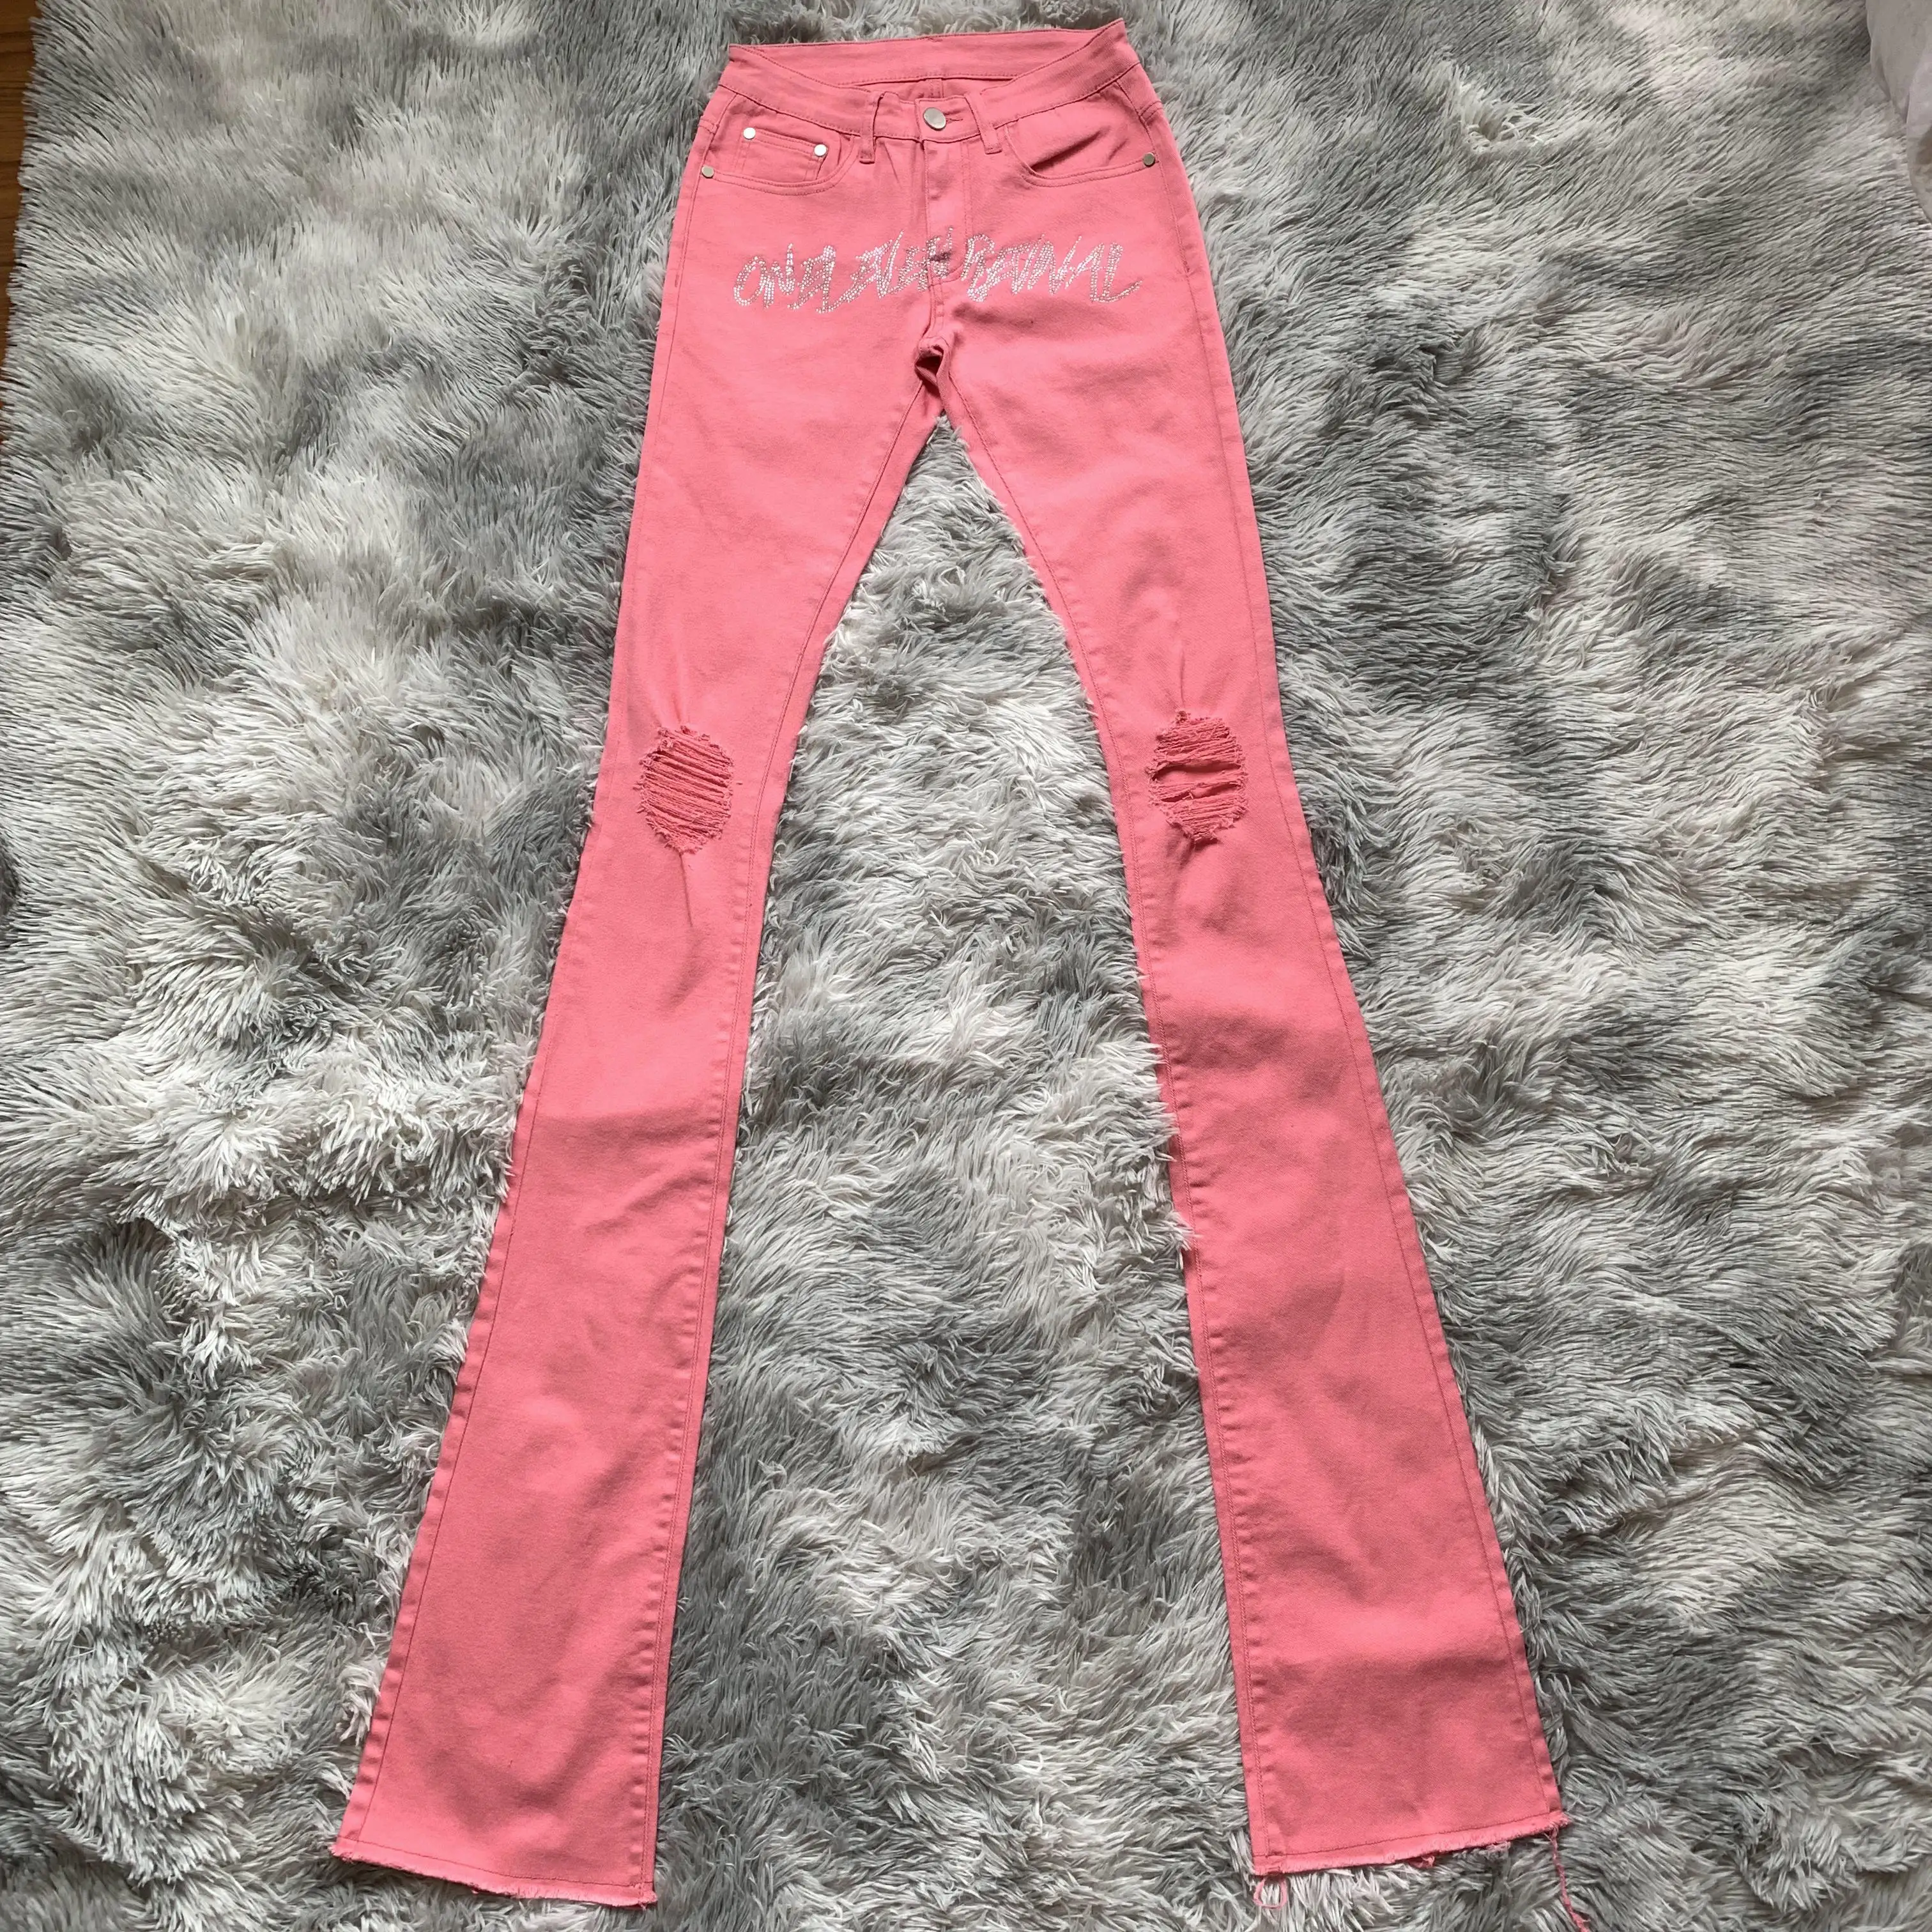 DENIMGUYS real Austrian MC rhinestone fly part pink tapered custom stacked men's jeans